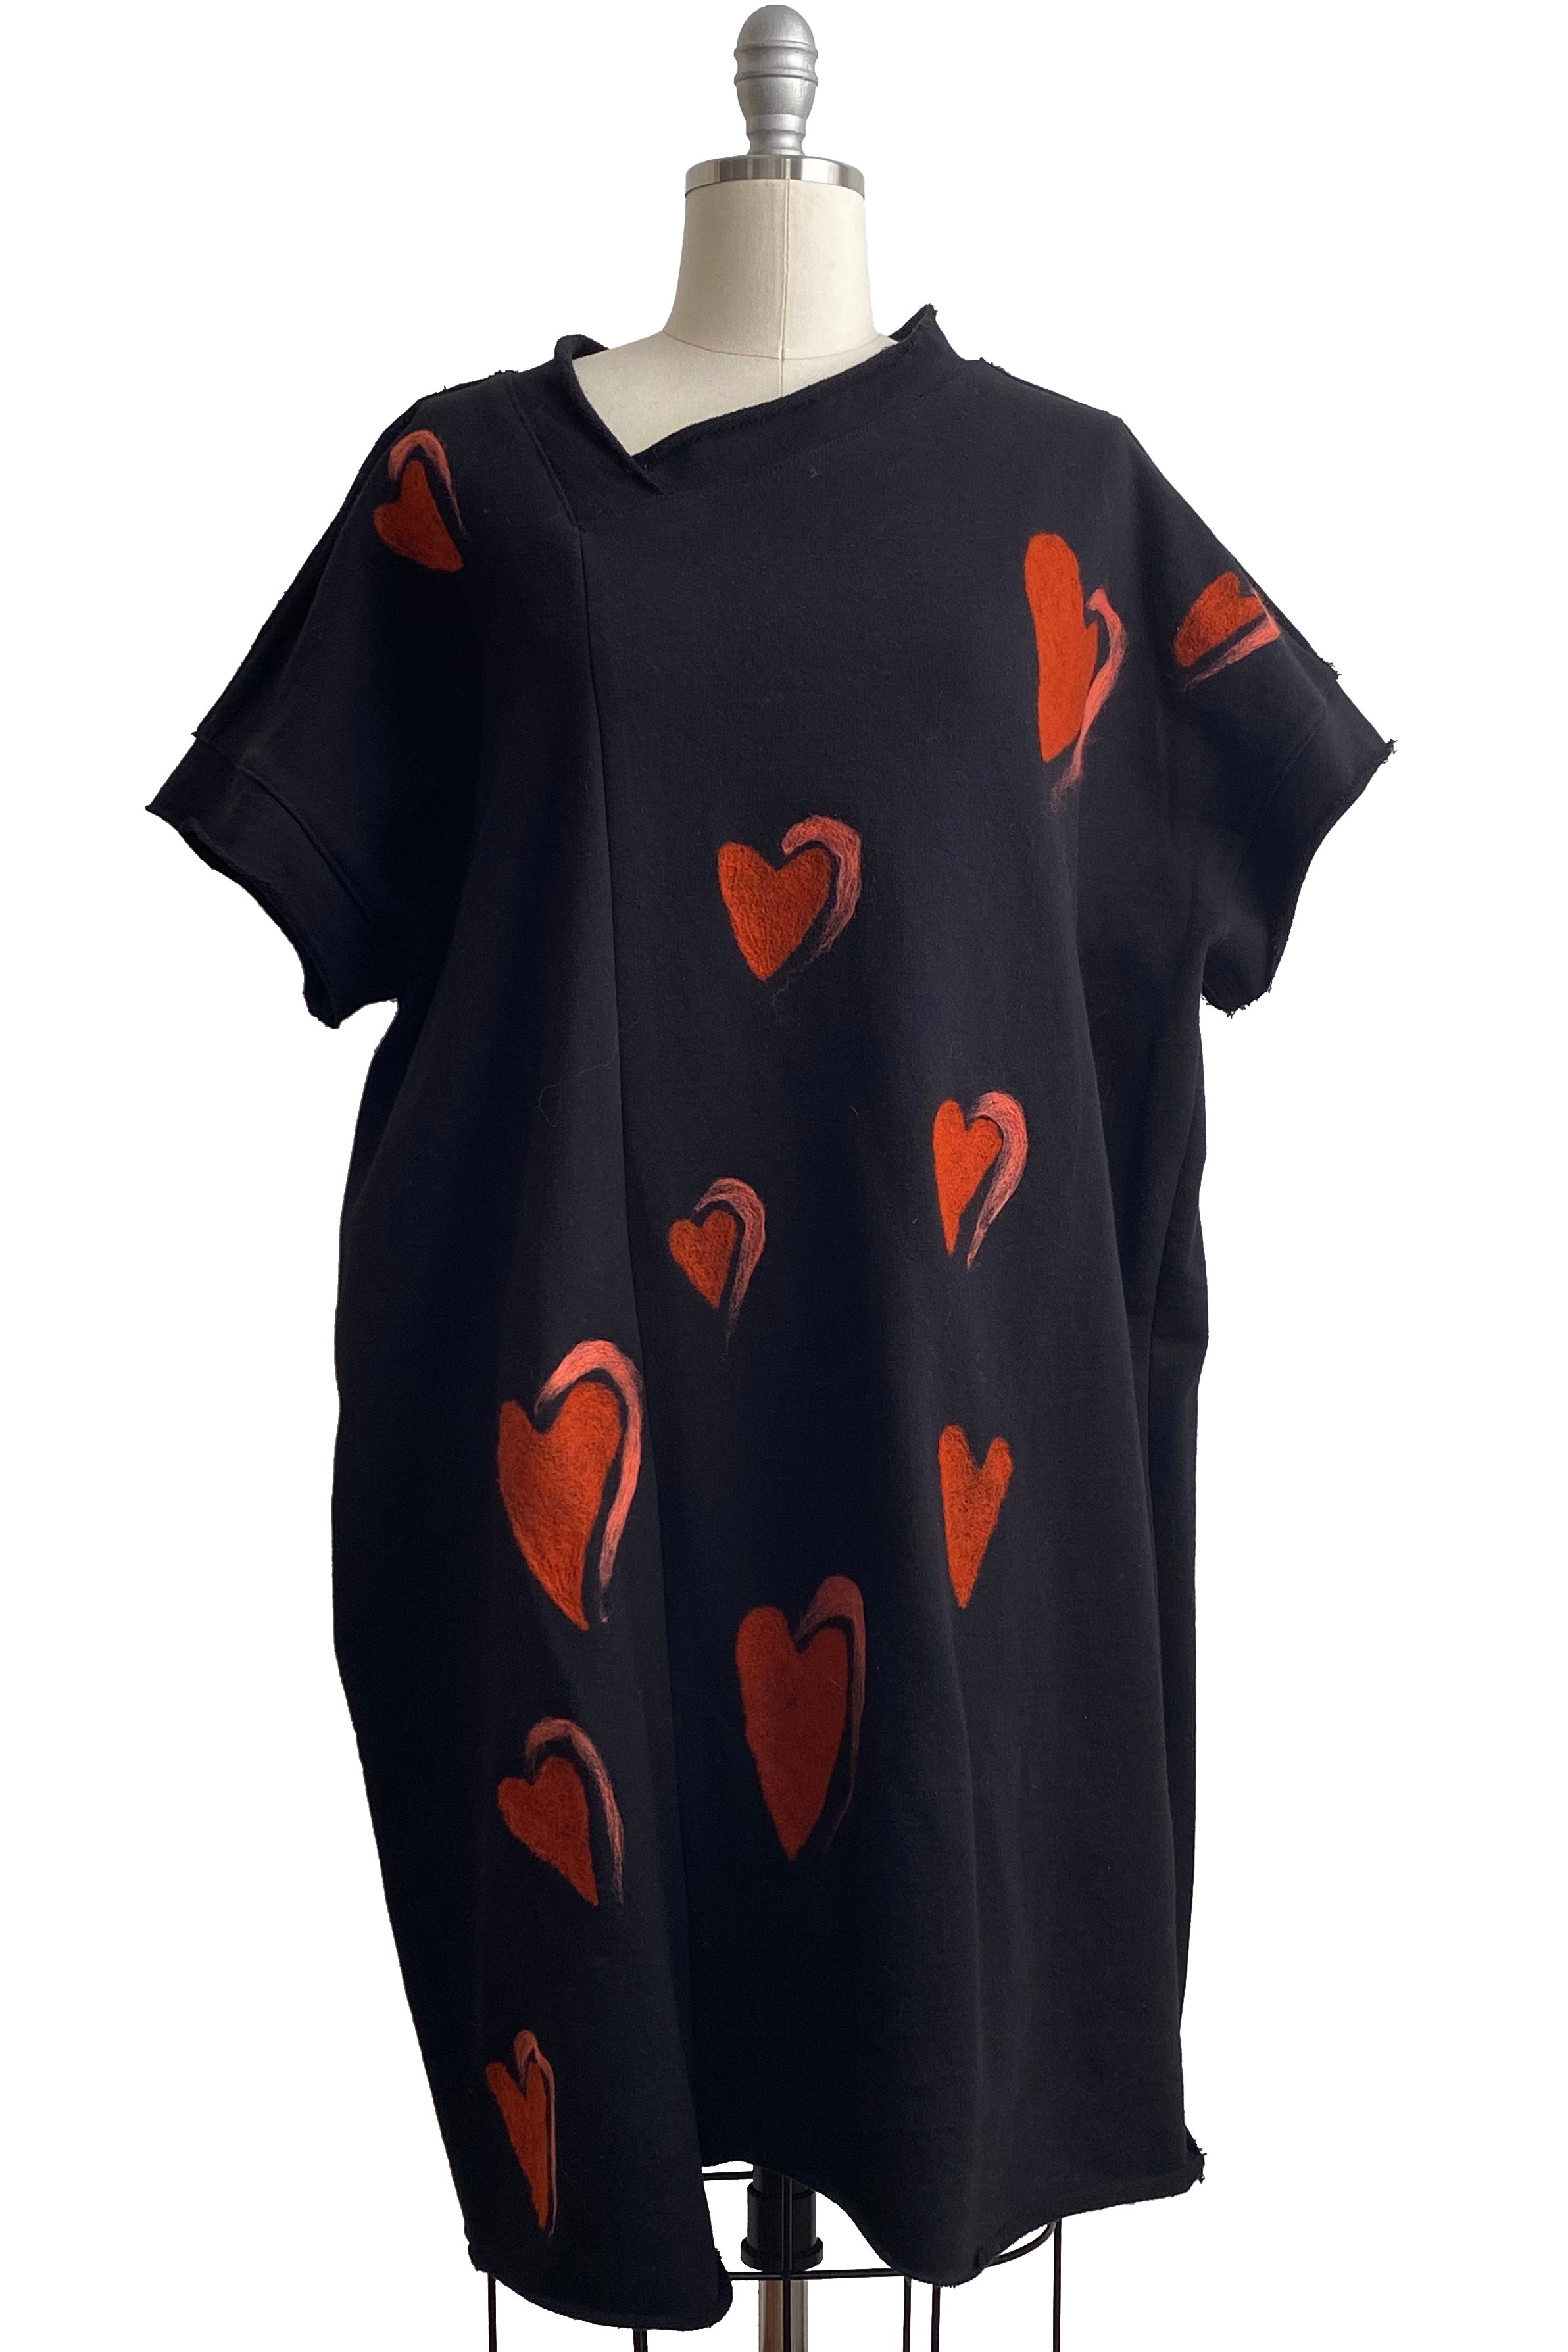 Petra Tunic Knit w/ Felted Hearts - Black, Pink, & Red - Medium